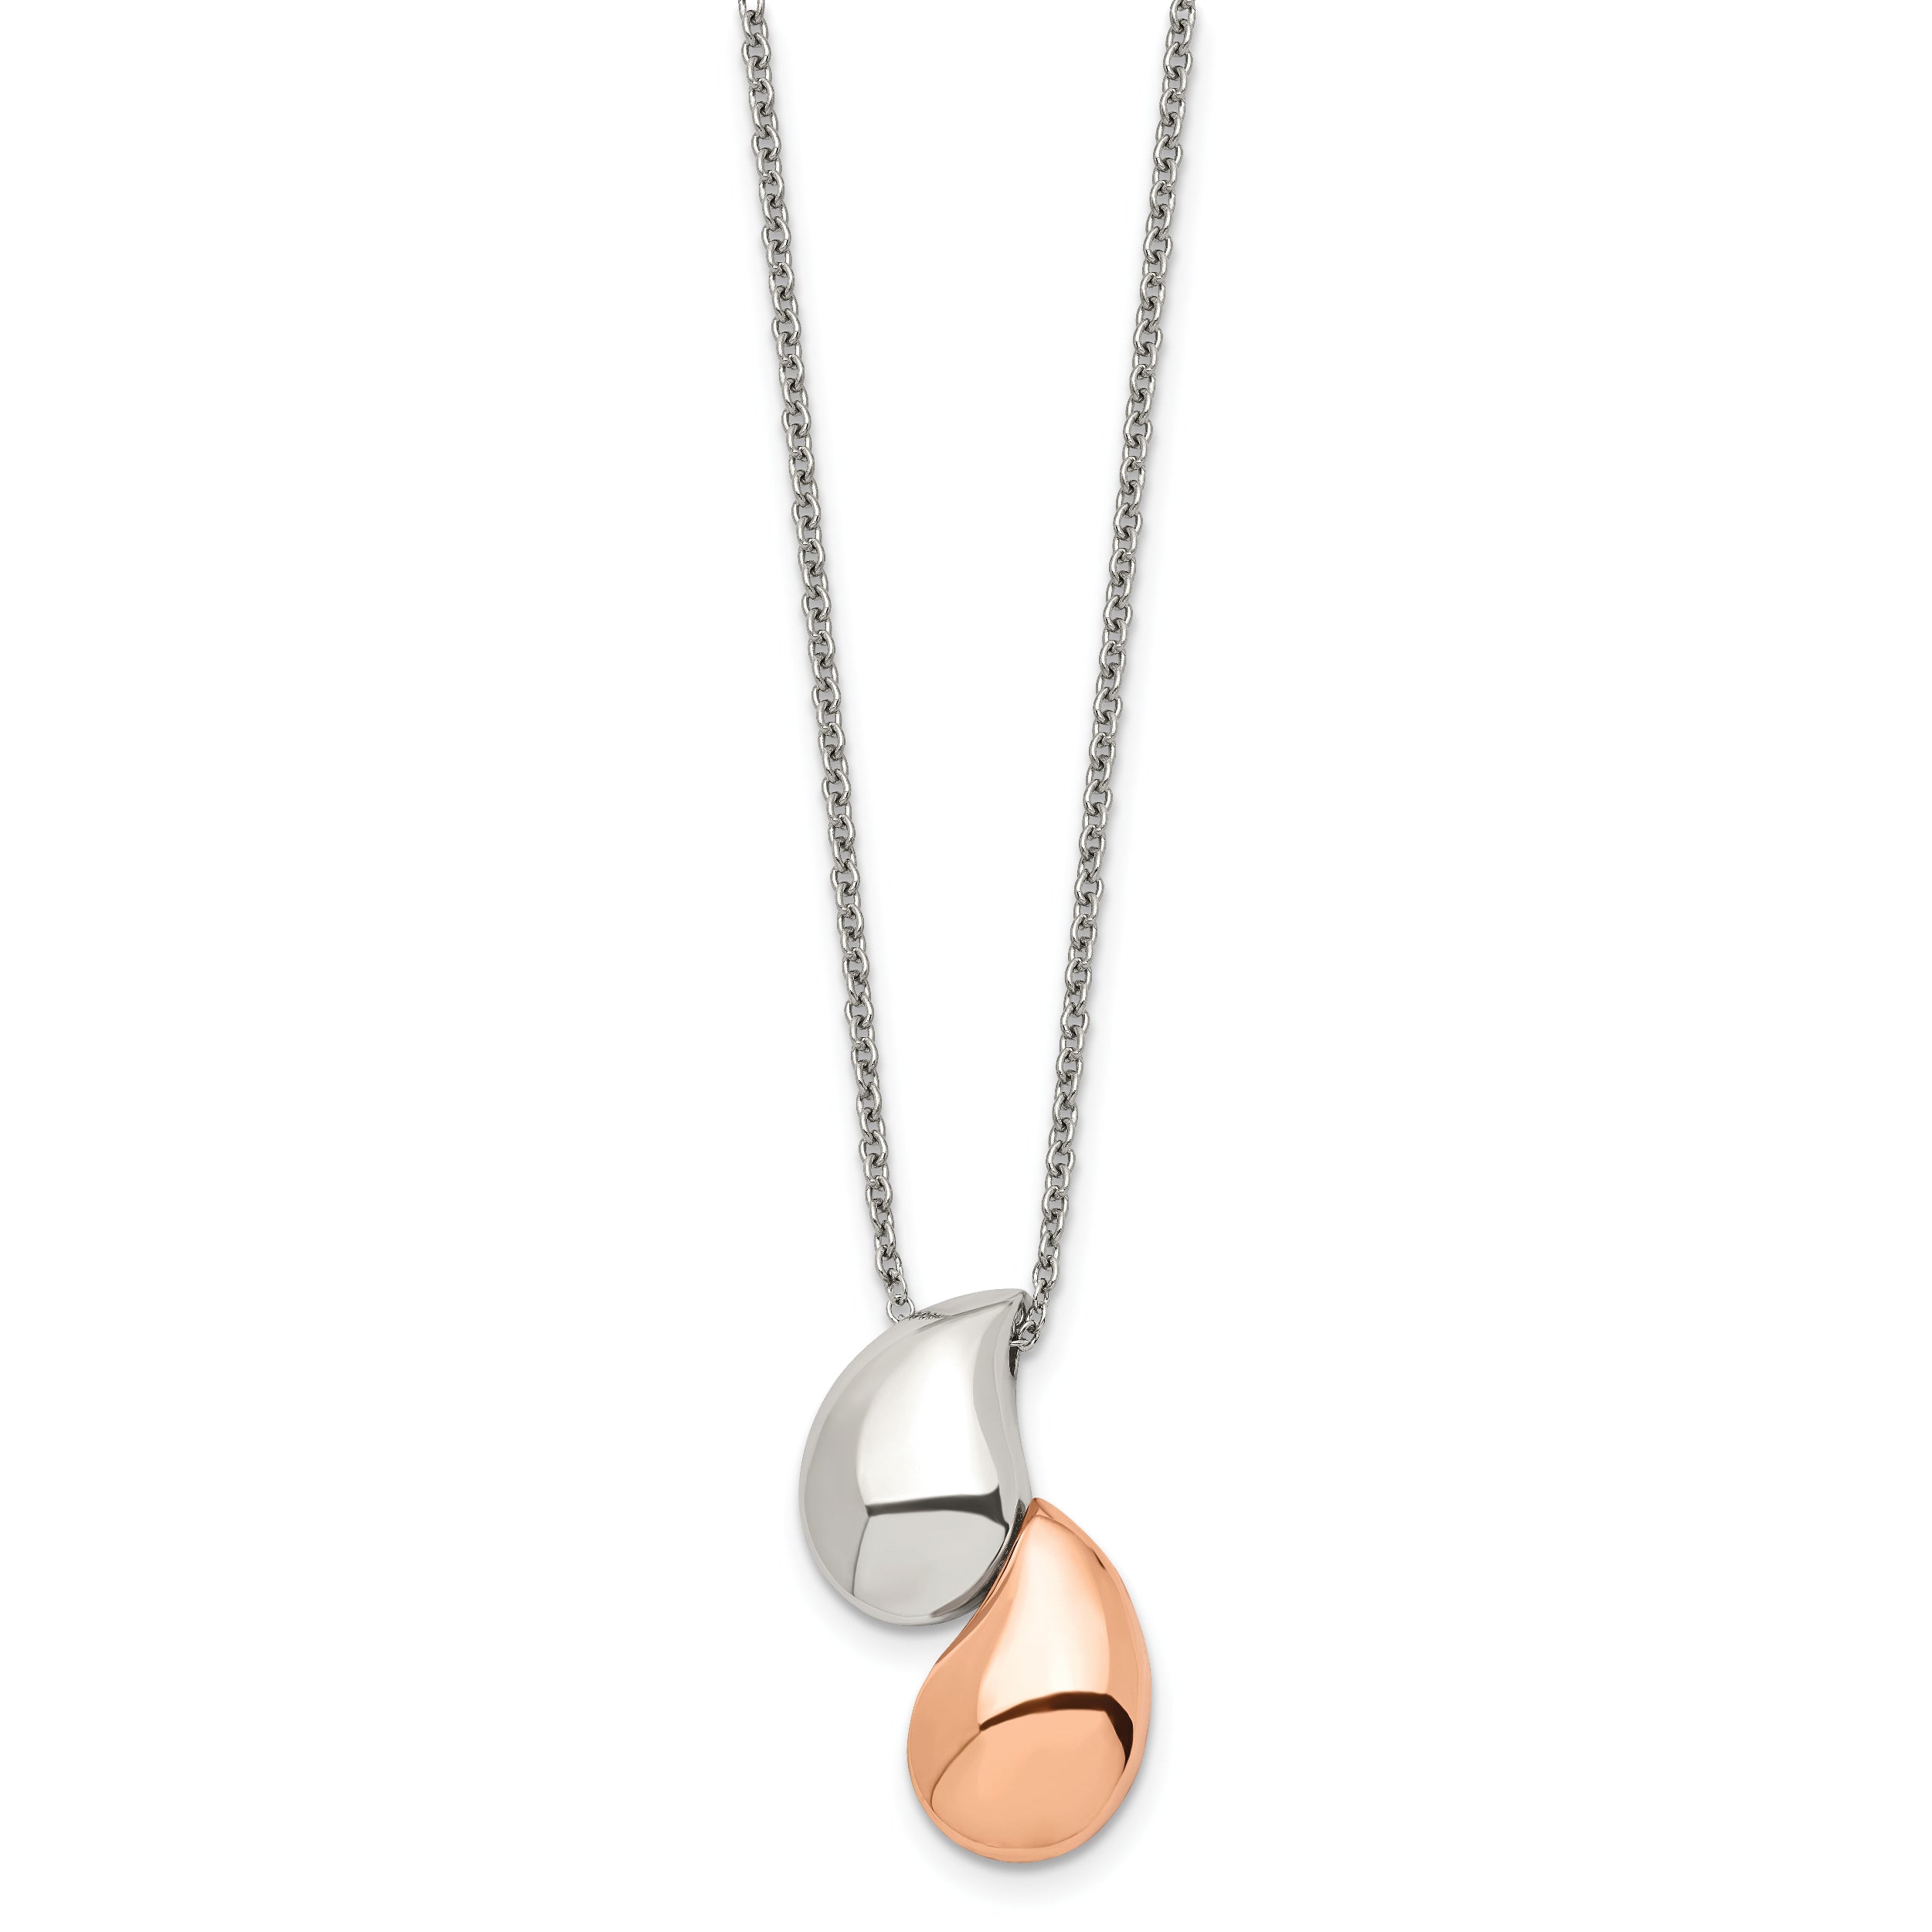 Chisel Stainless Steel Polished Rose IP-plated Teardrops Pendant on an 18 inch Cable Chain Necklace